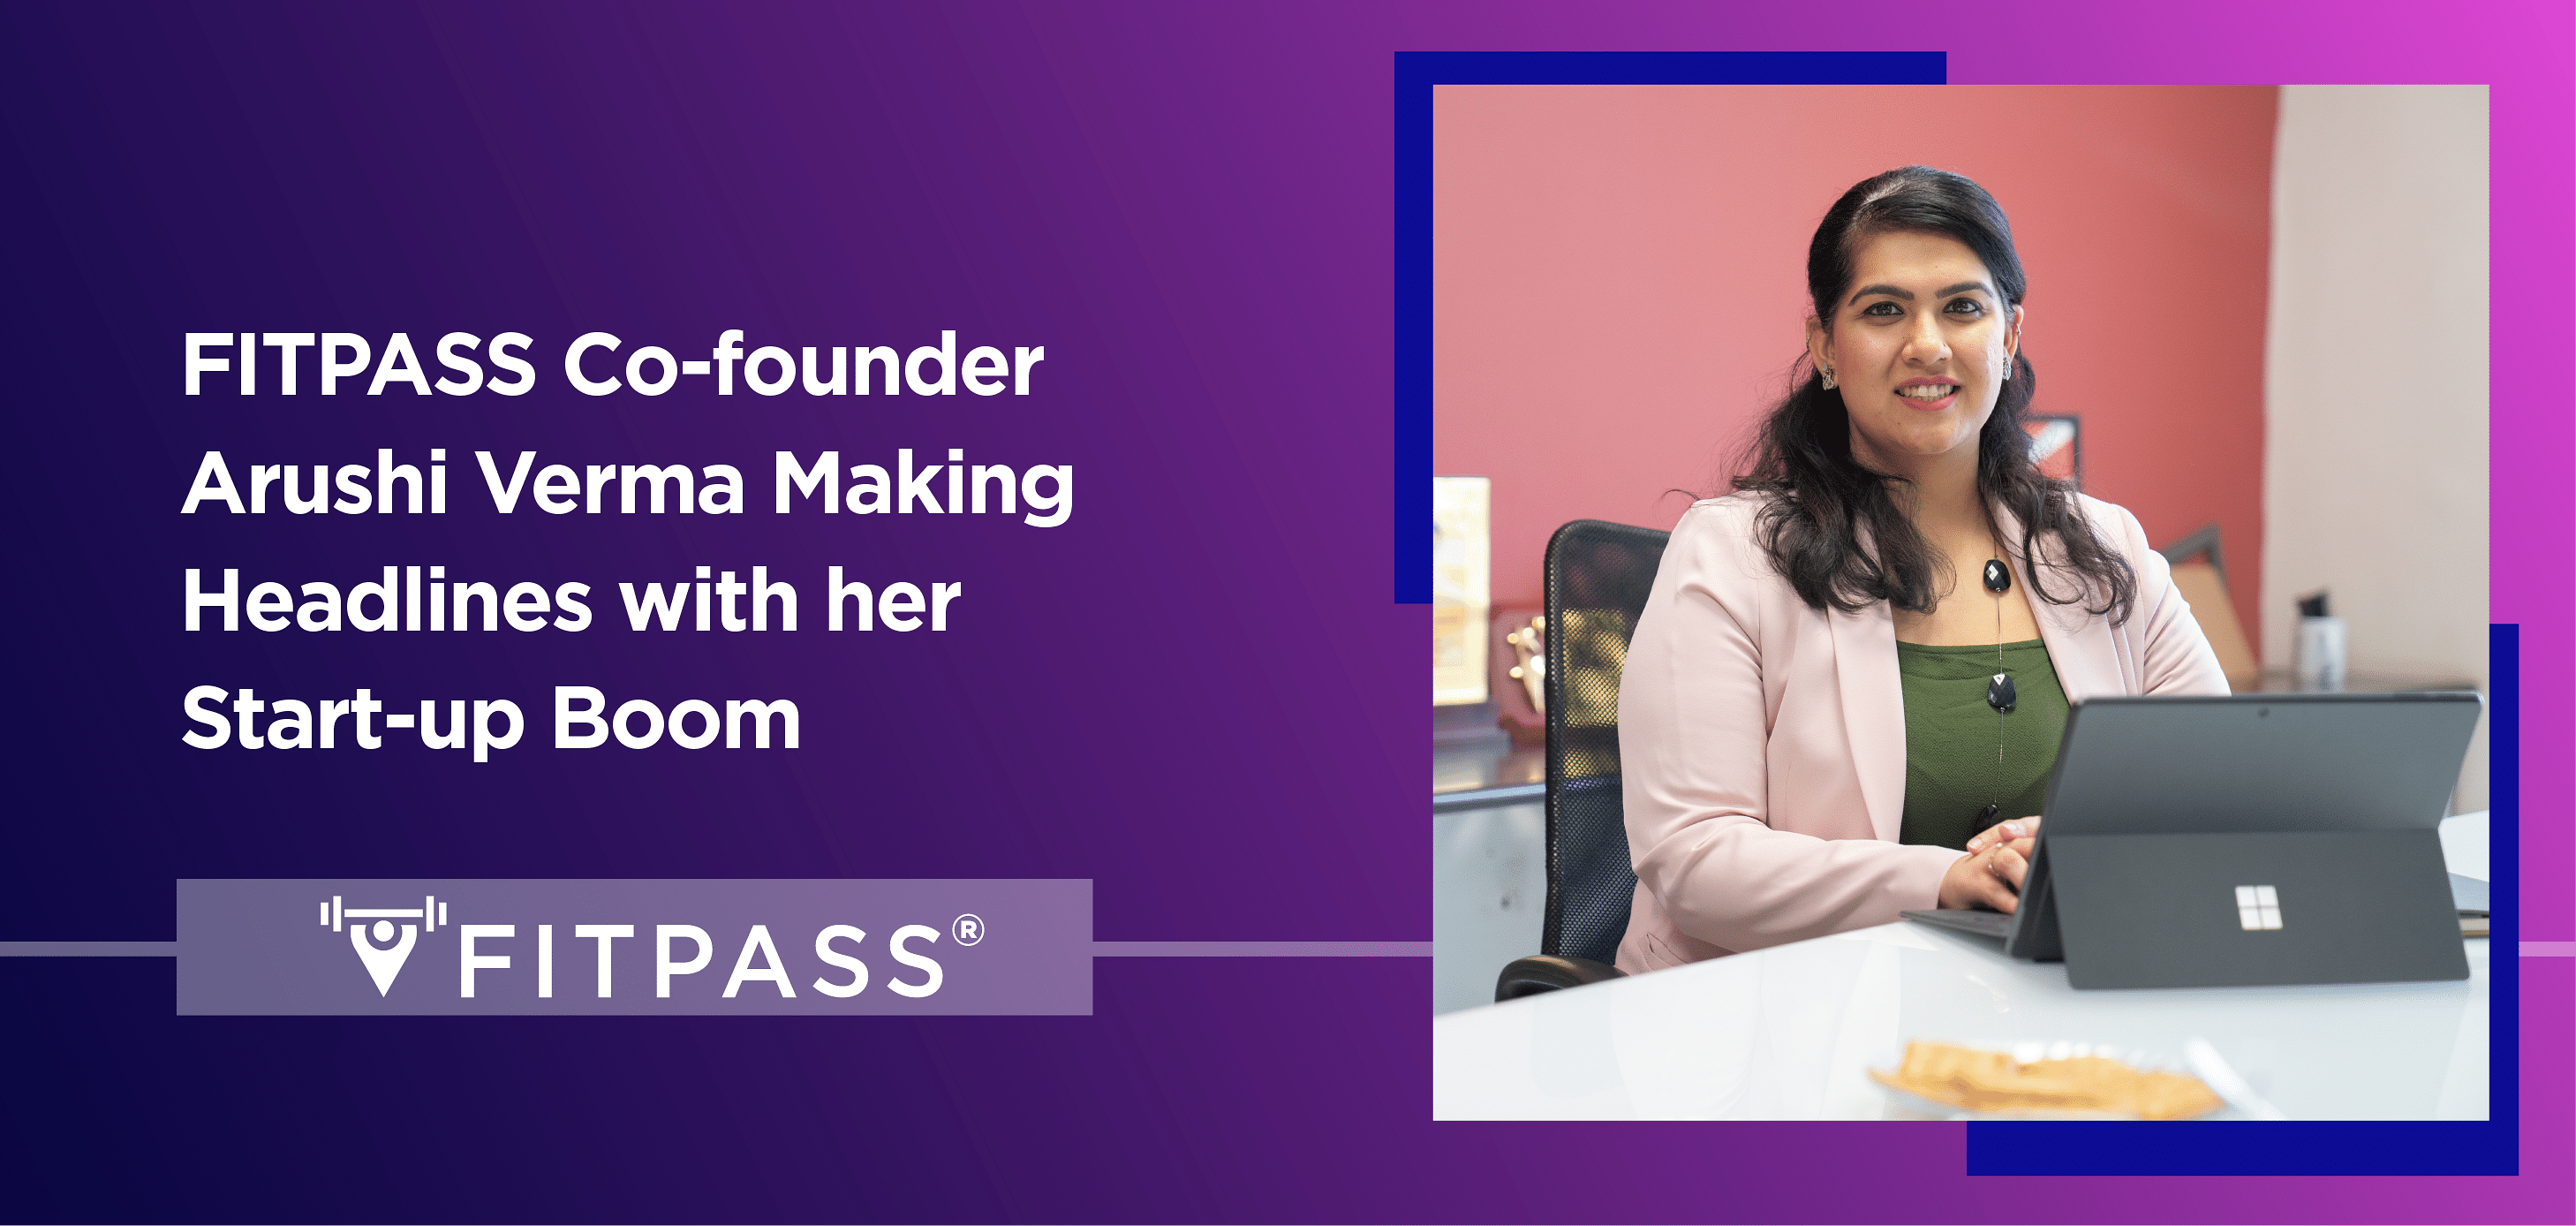 FITPASS Co-founder Arushi Verma Making Headlines with her Start-up Boom